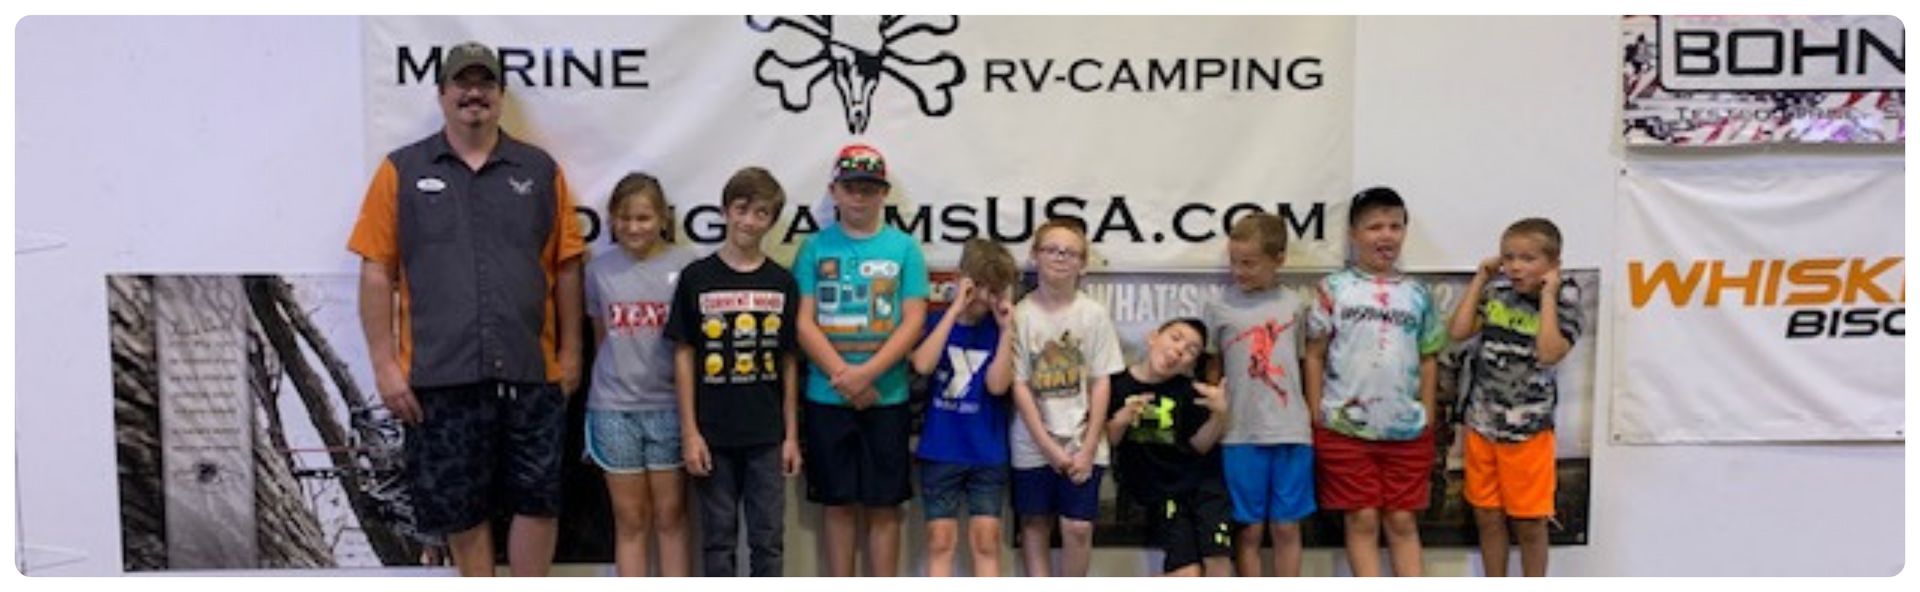 ymca volunteer with youth campers